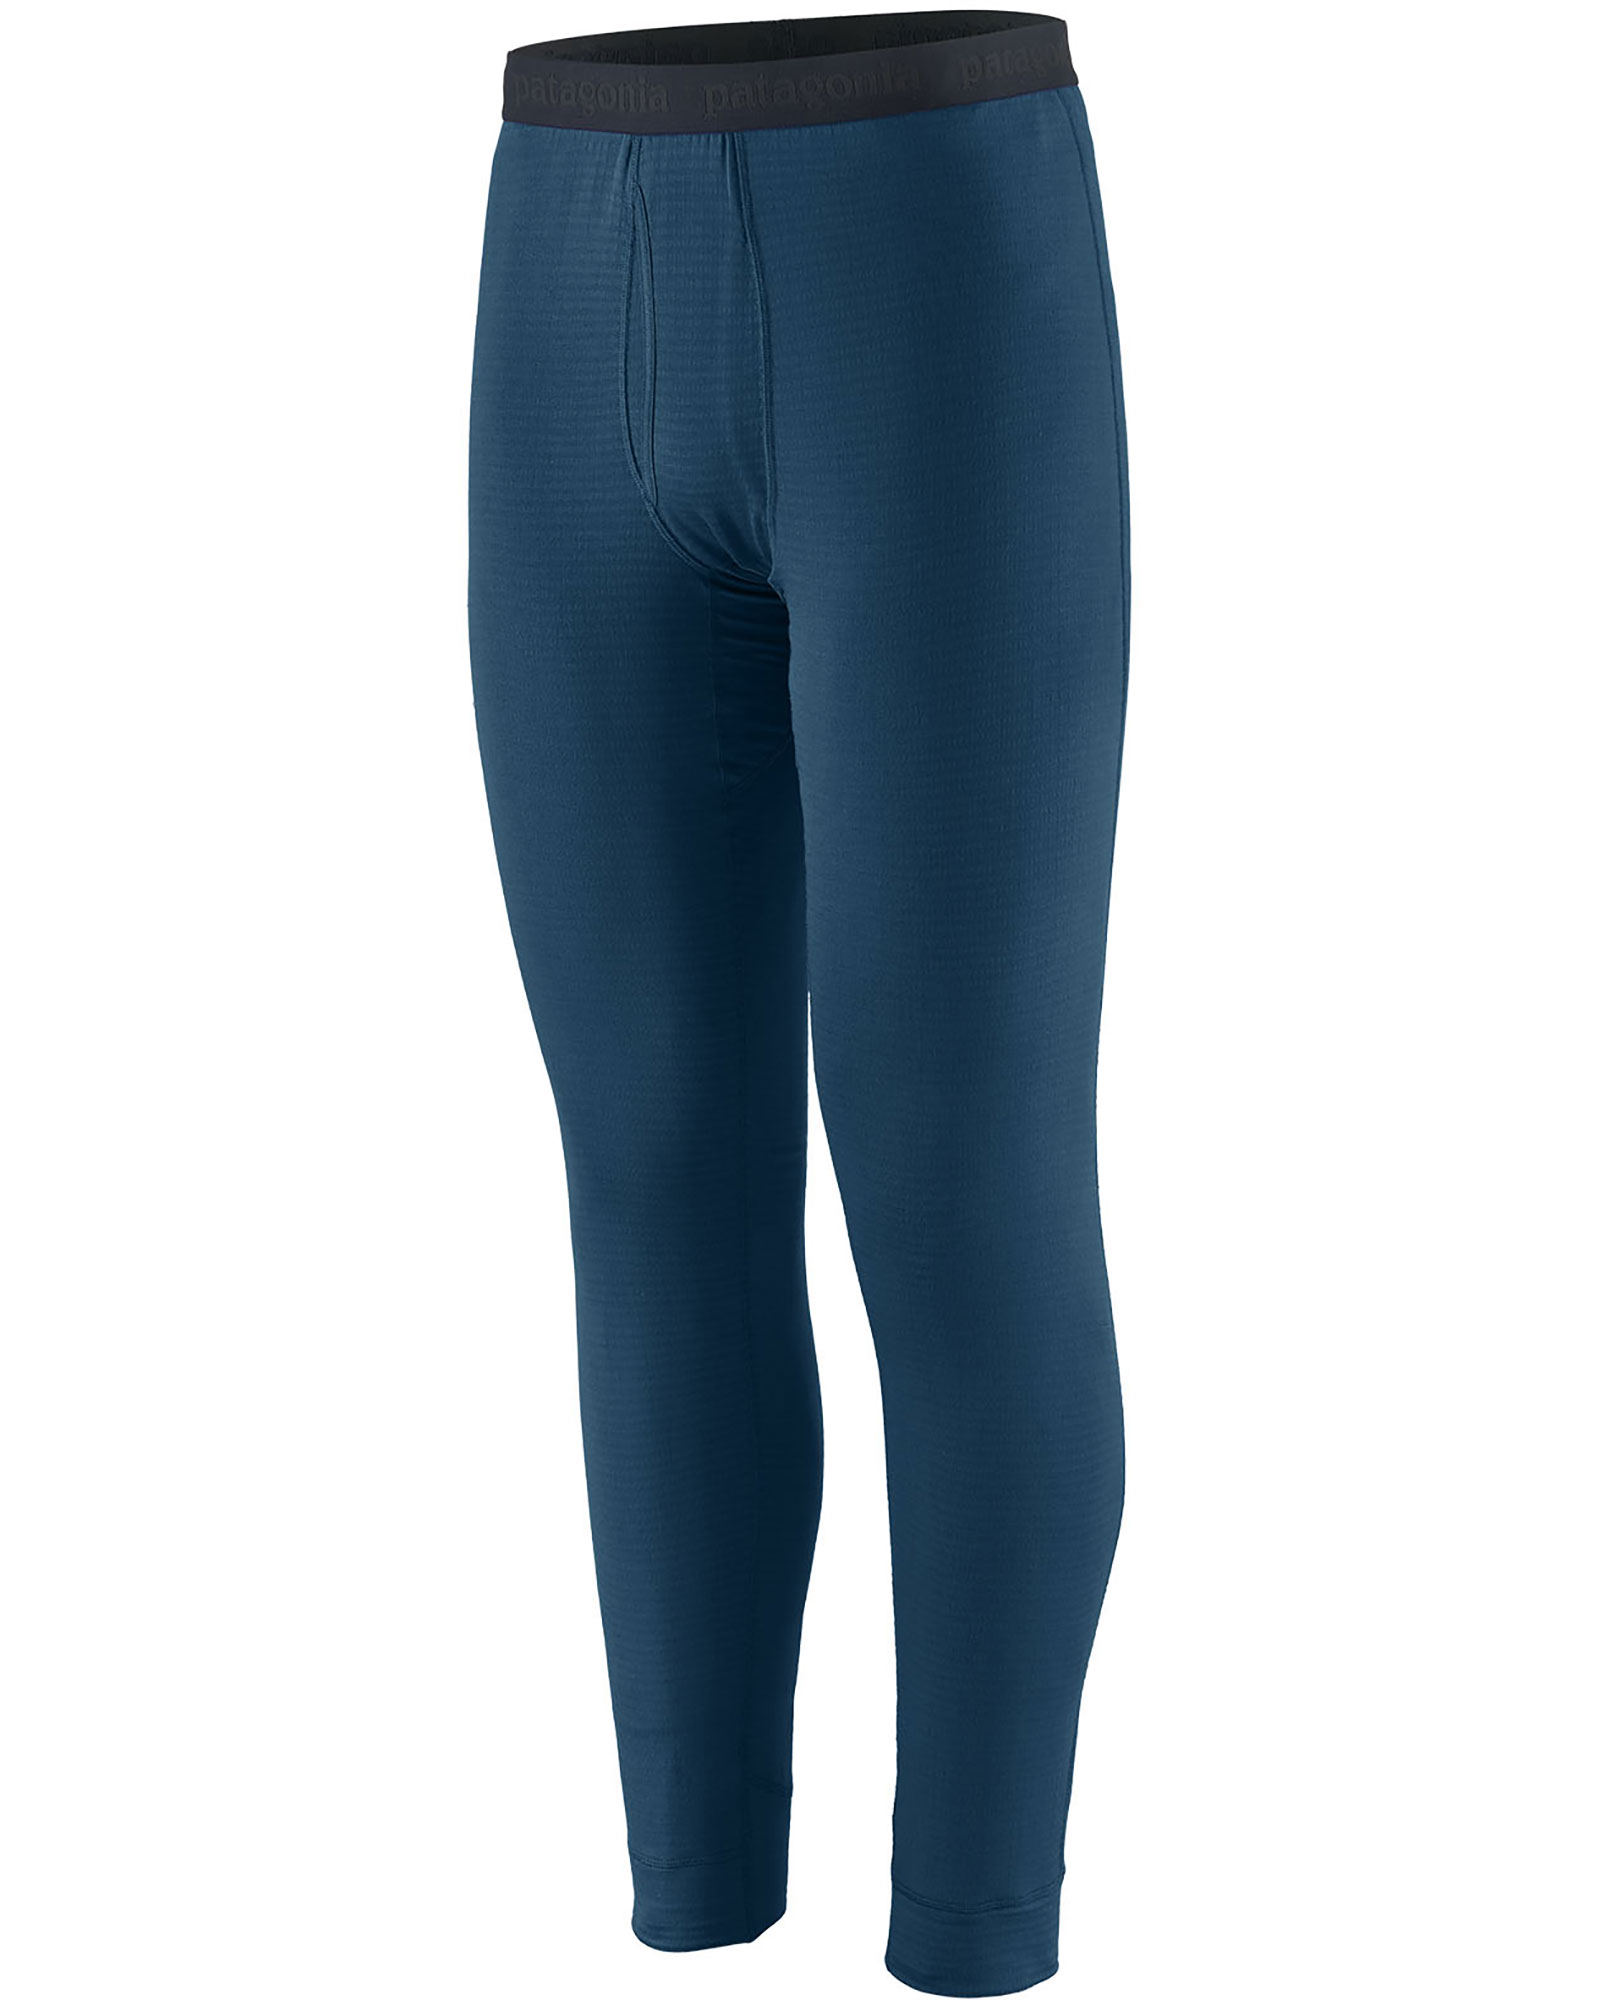 Patagonia Capilene Men’s Thermal Weight Tights - Lagoon Blue S